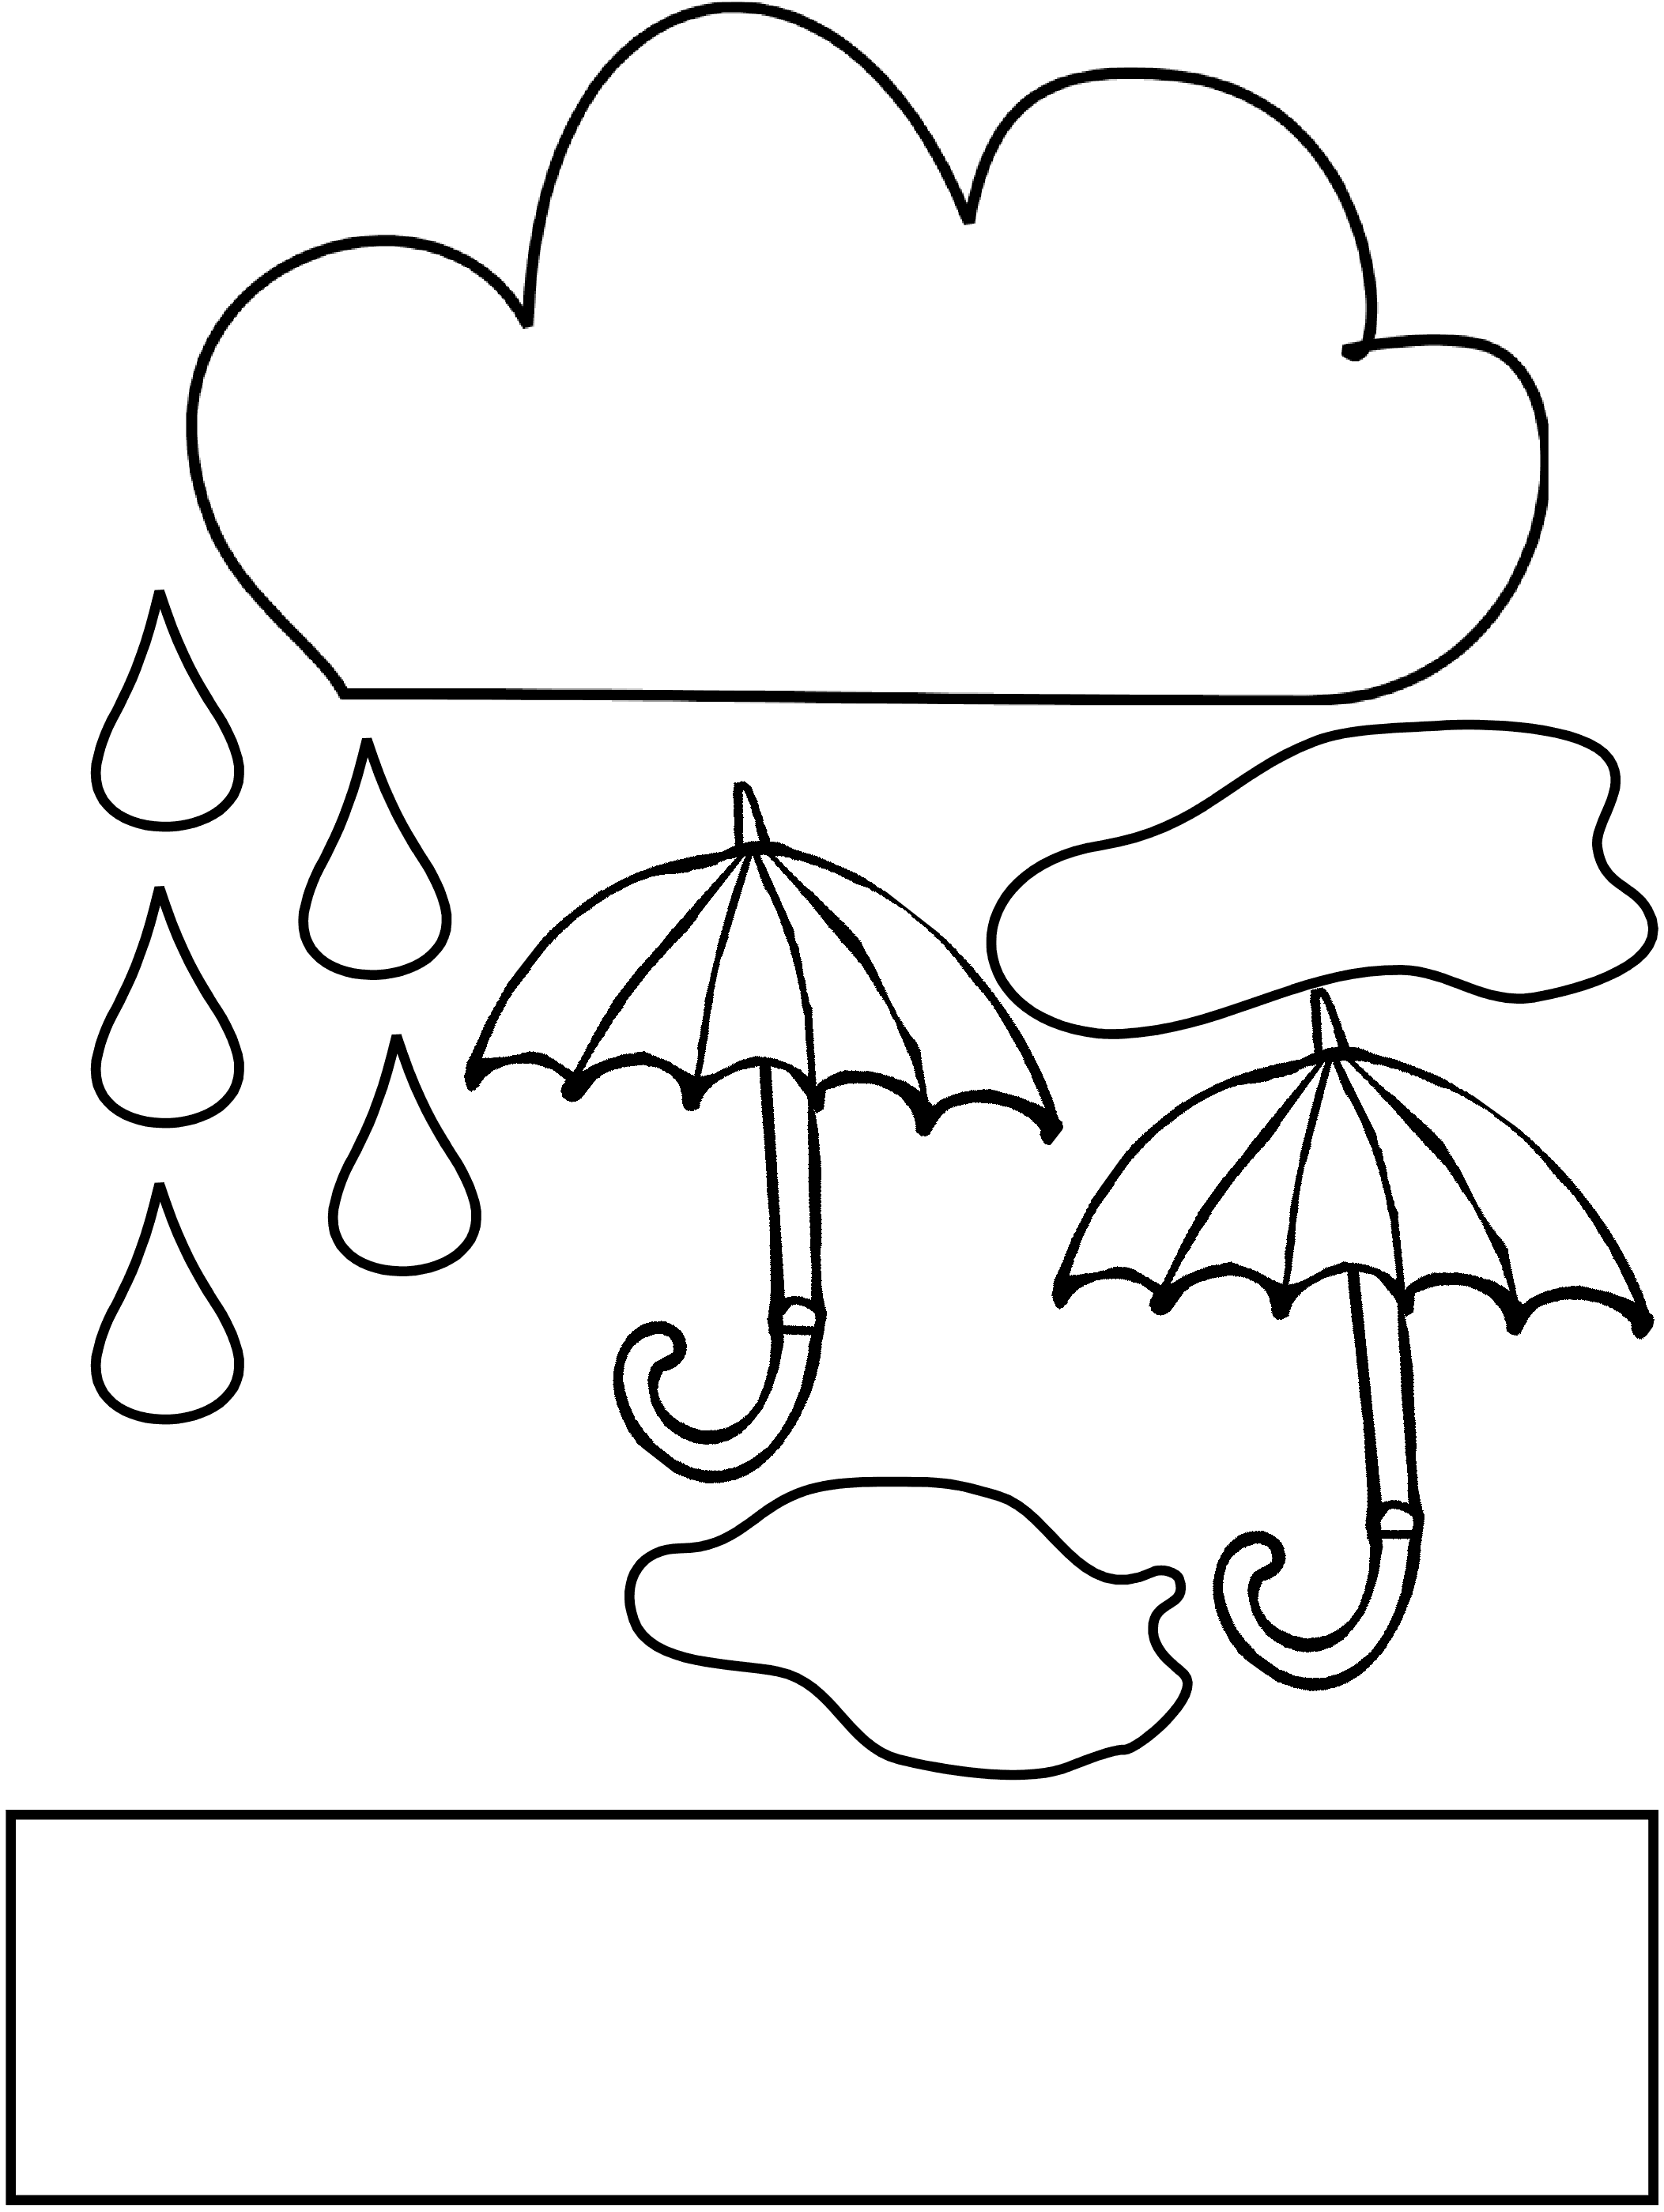 Rain Coloring Page - Coloring Home